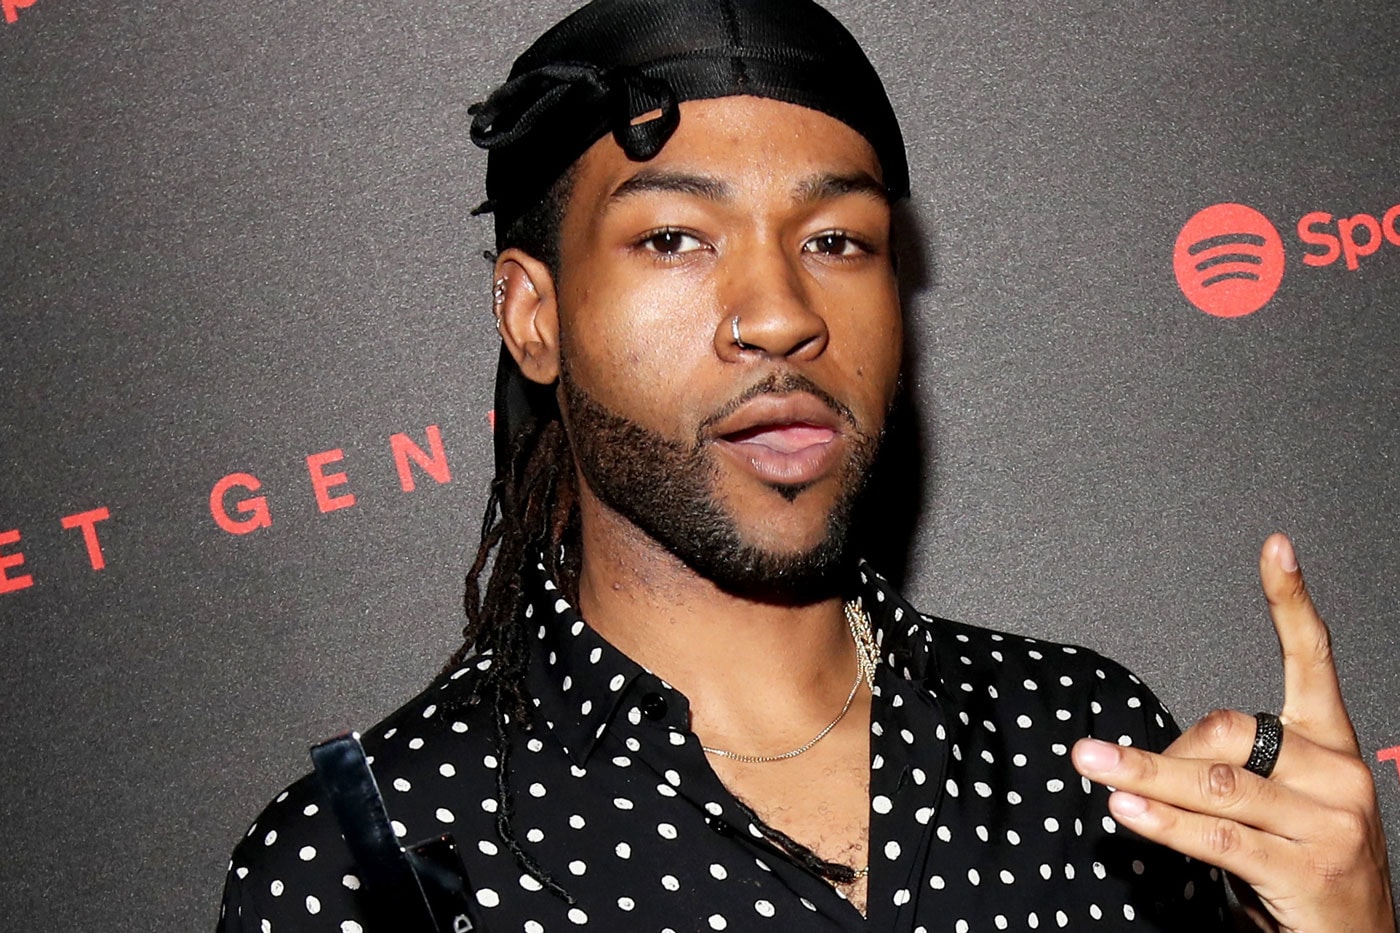 PARTYNEXTDOOR & TM88 Are Releasing a Collaborative Project